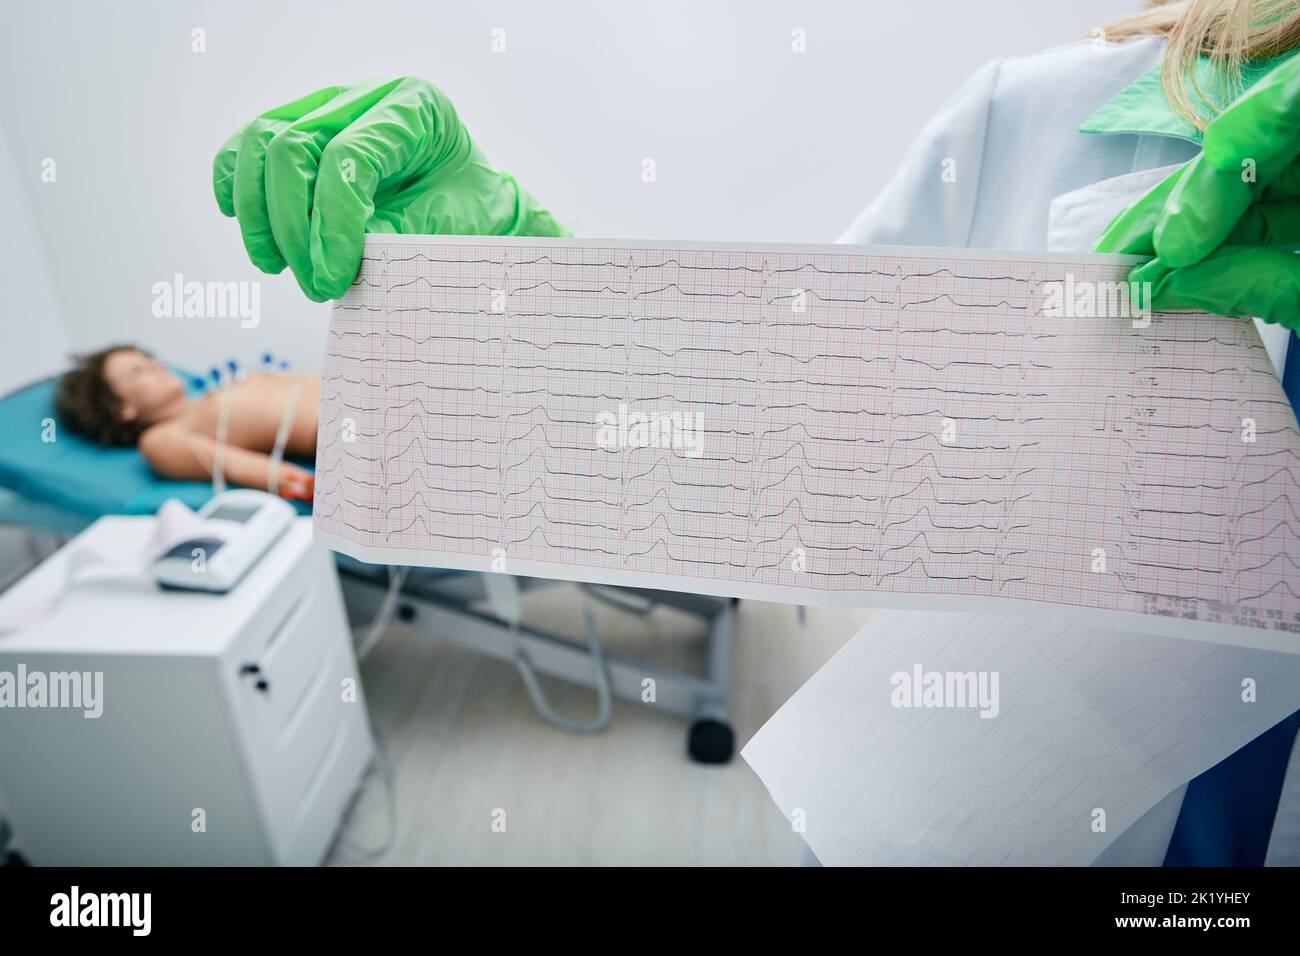 Cardiogram test of child's heart close-up in doctor hands against background of boy patient lying on medical couch with vacuum probes in heart area Stock Photo